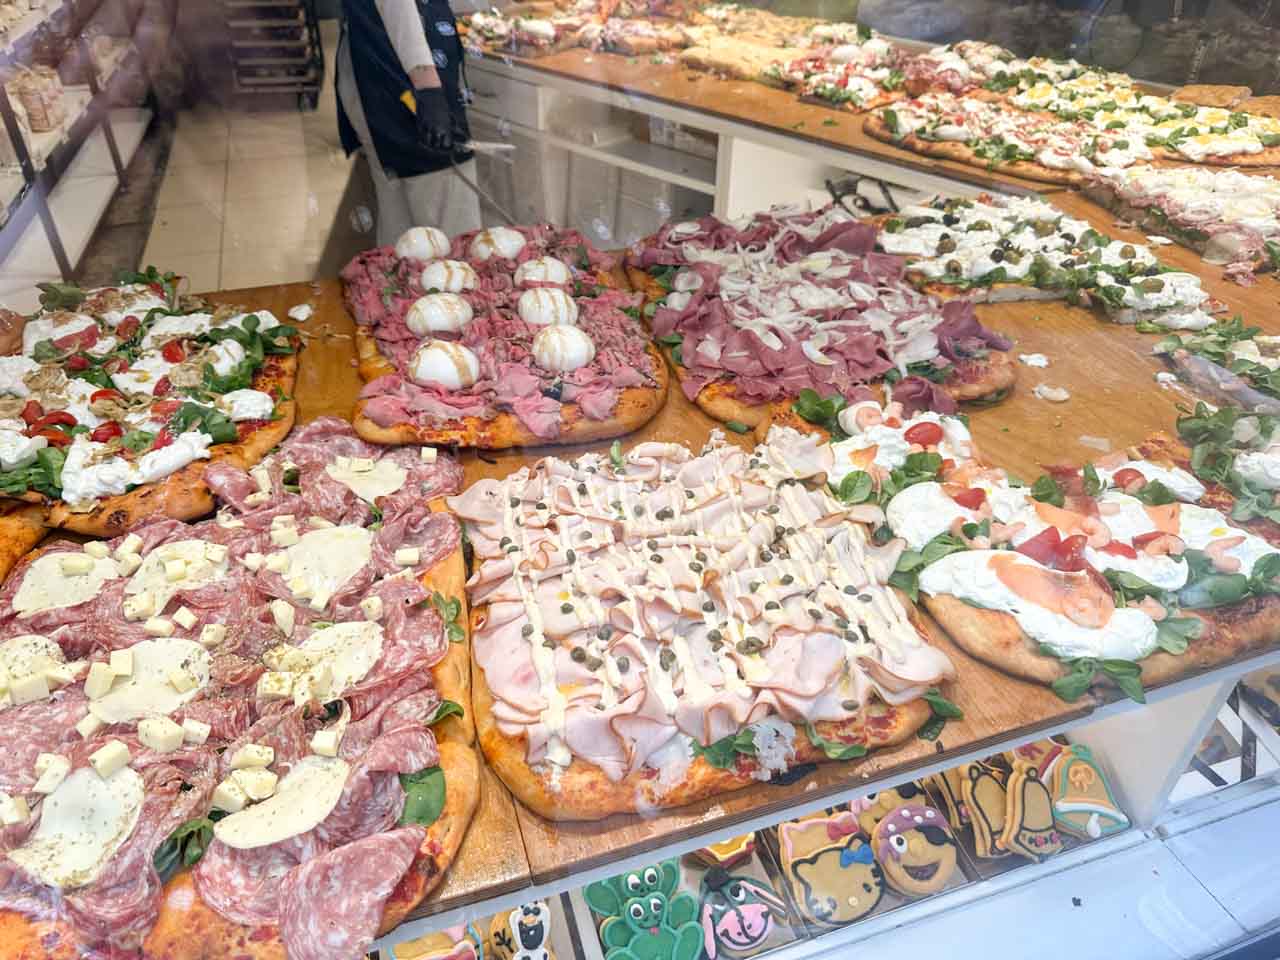 A variety of focaccia pizzas with different toppings such as cured meats, cheese, and fresh greens, laid out on a large wooden board at Il Fornaio in Bergamo, Italy